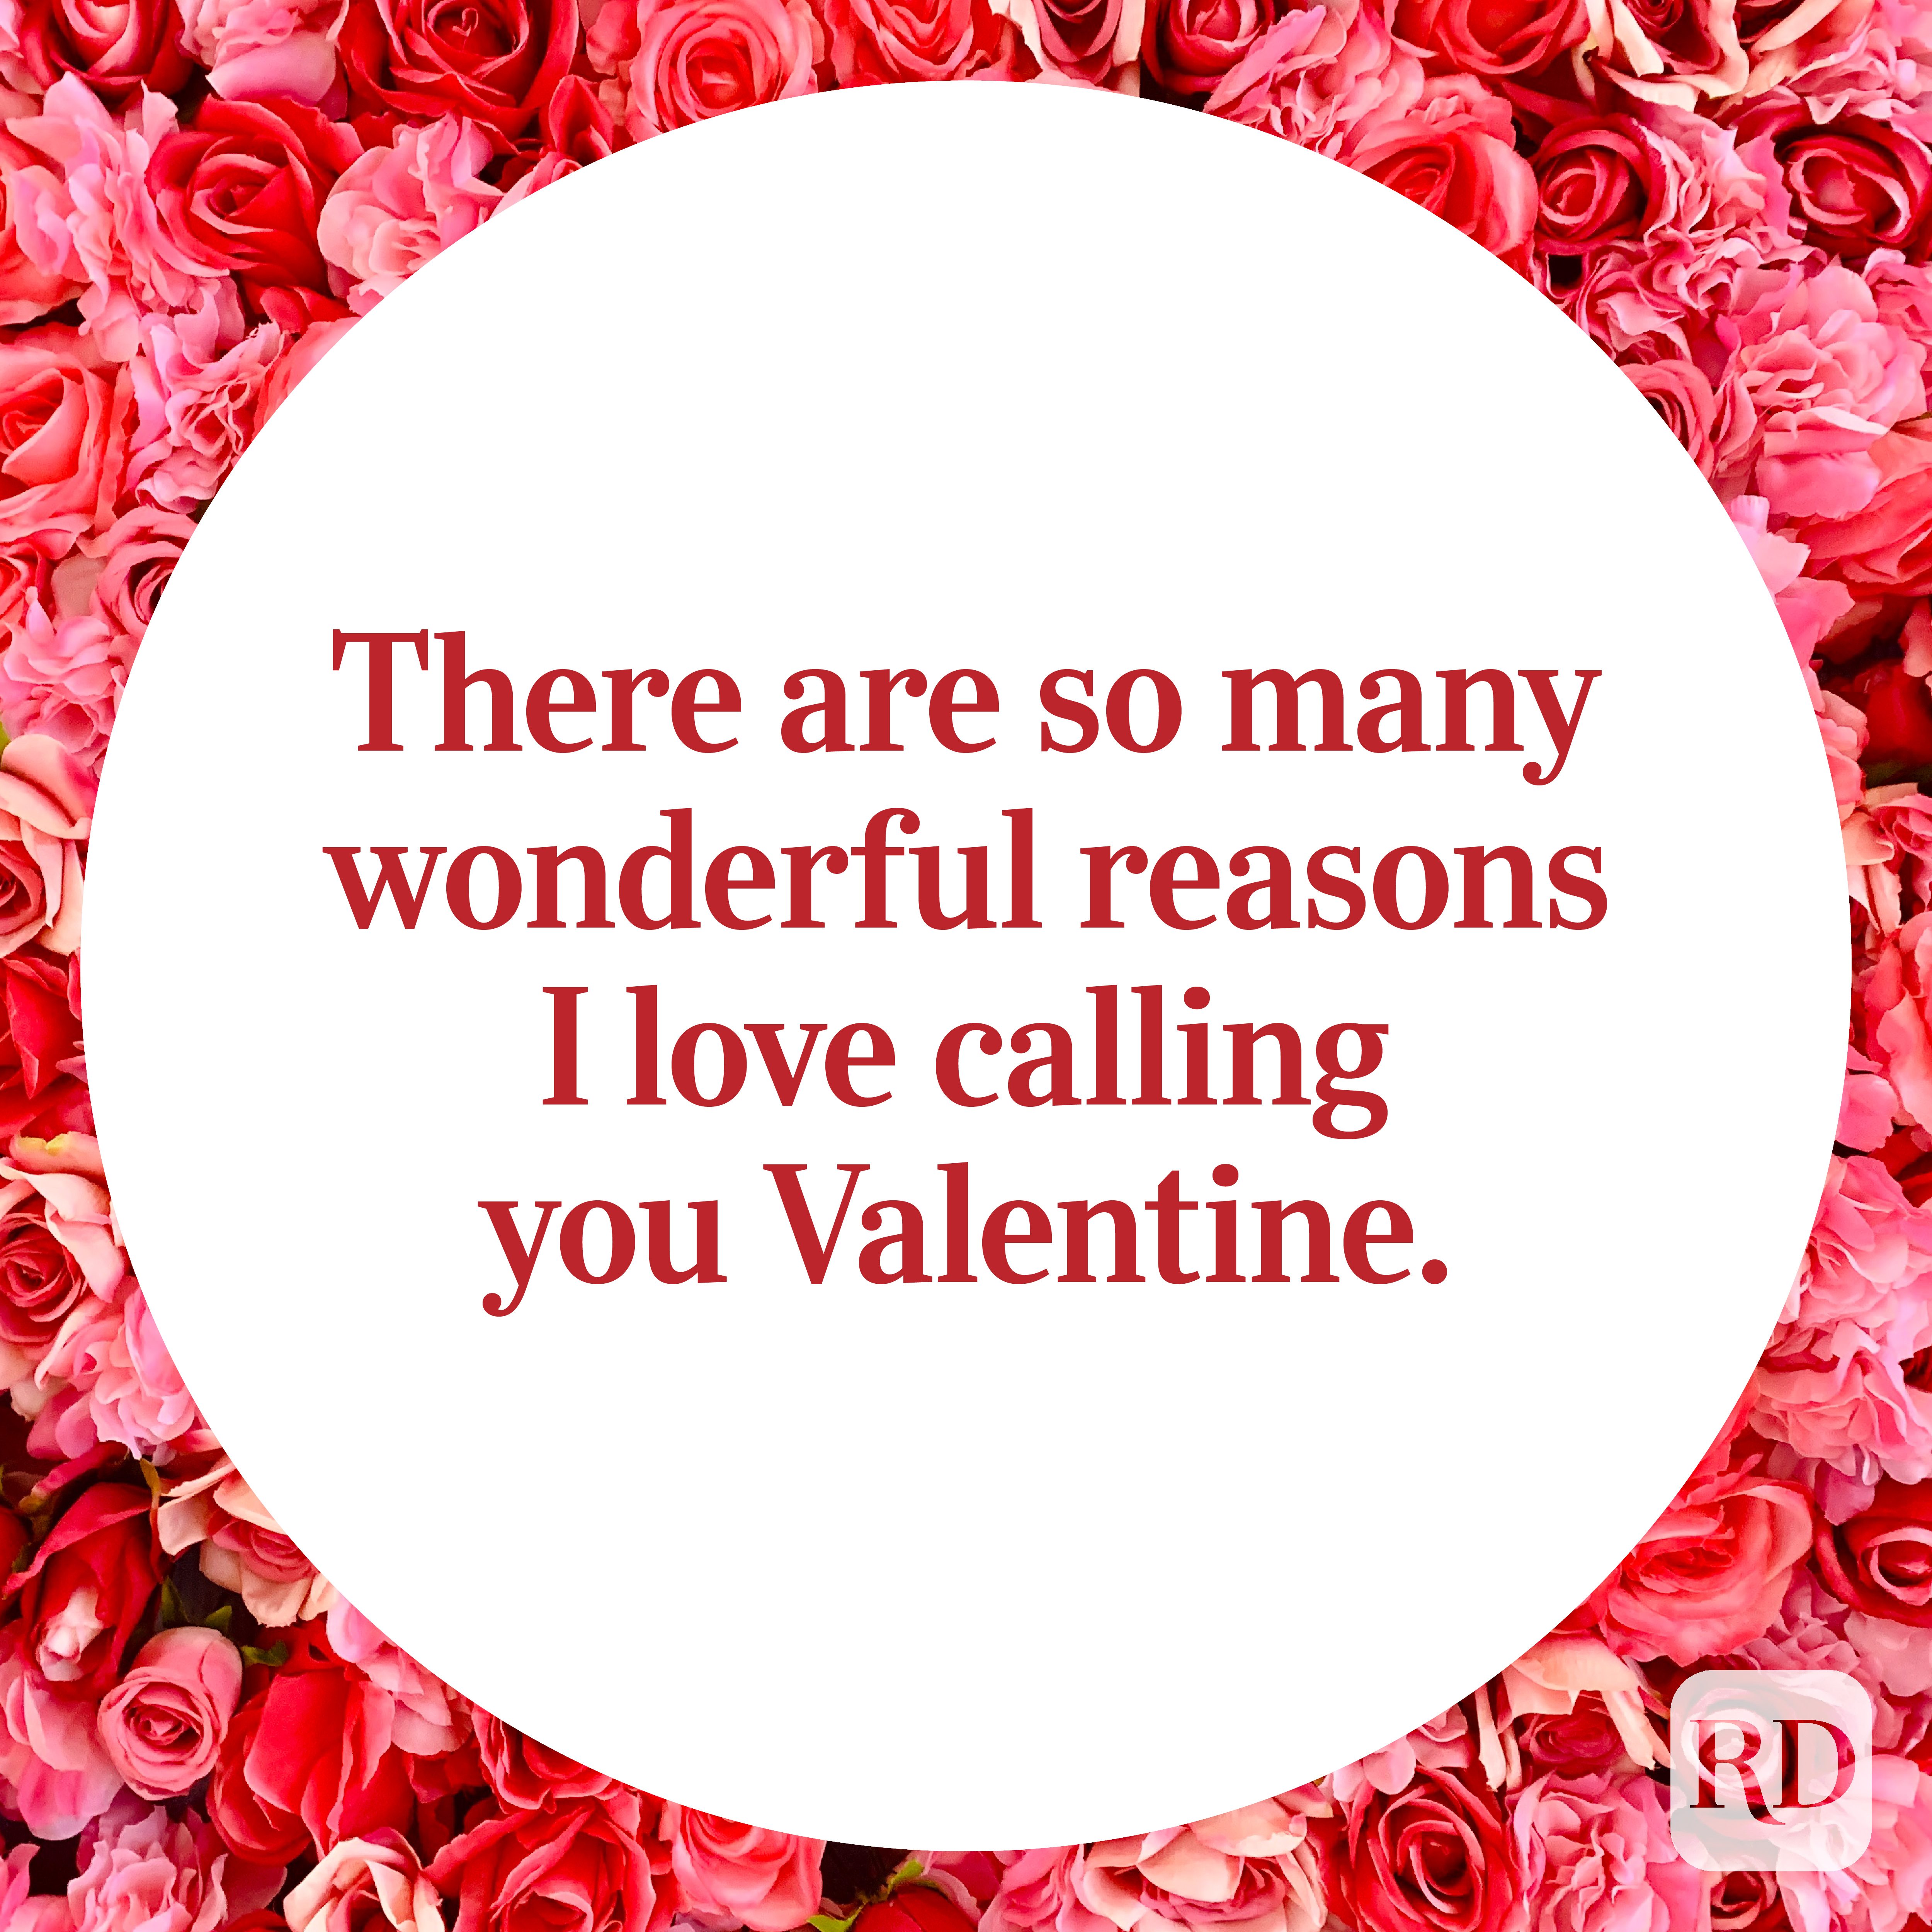 90 Best Valentine's Day Quotes to Help Express Your Love